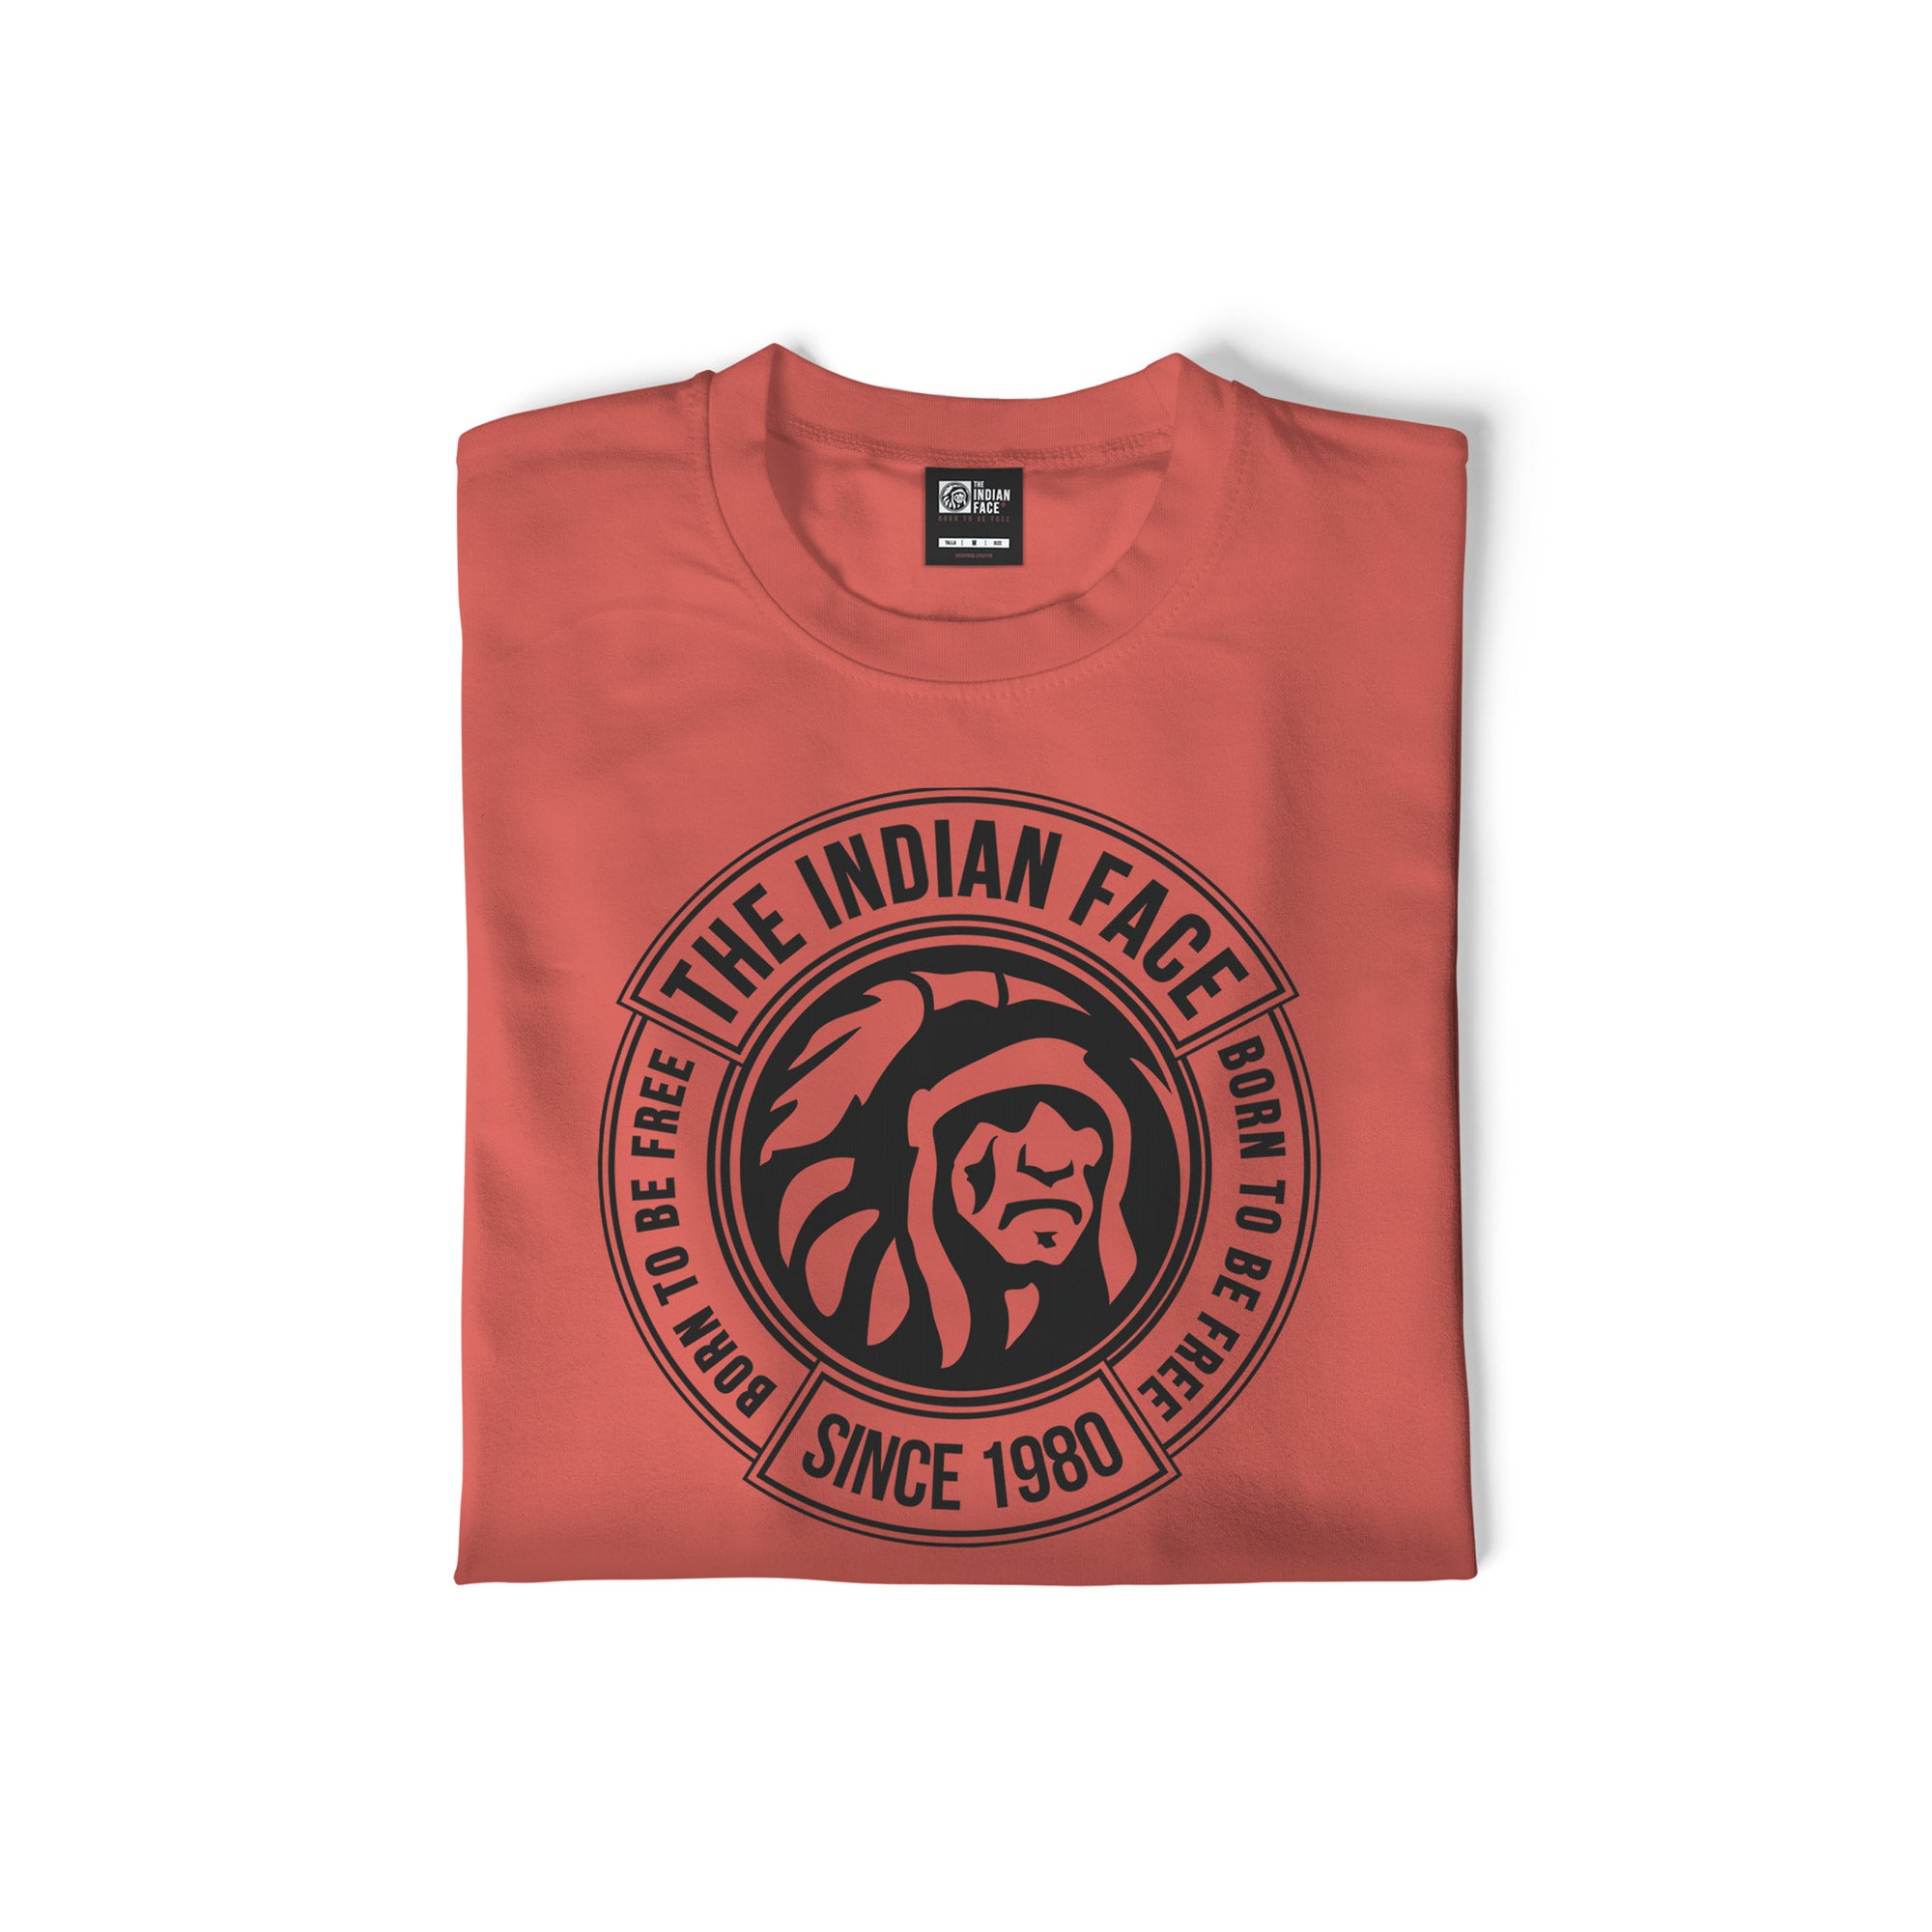 Camiseta The Indian Face Soul